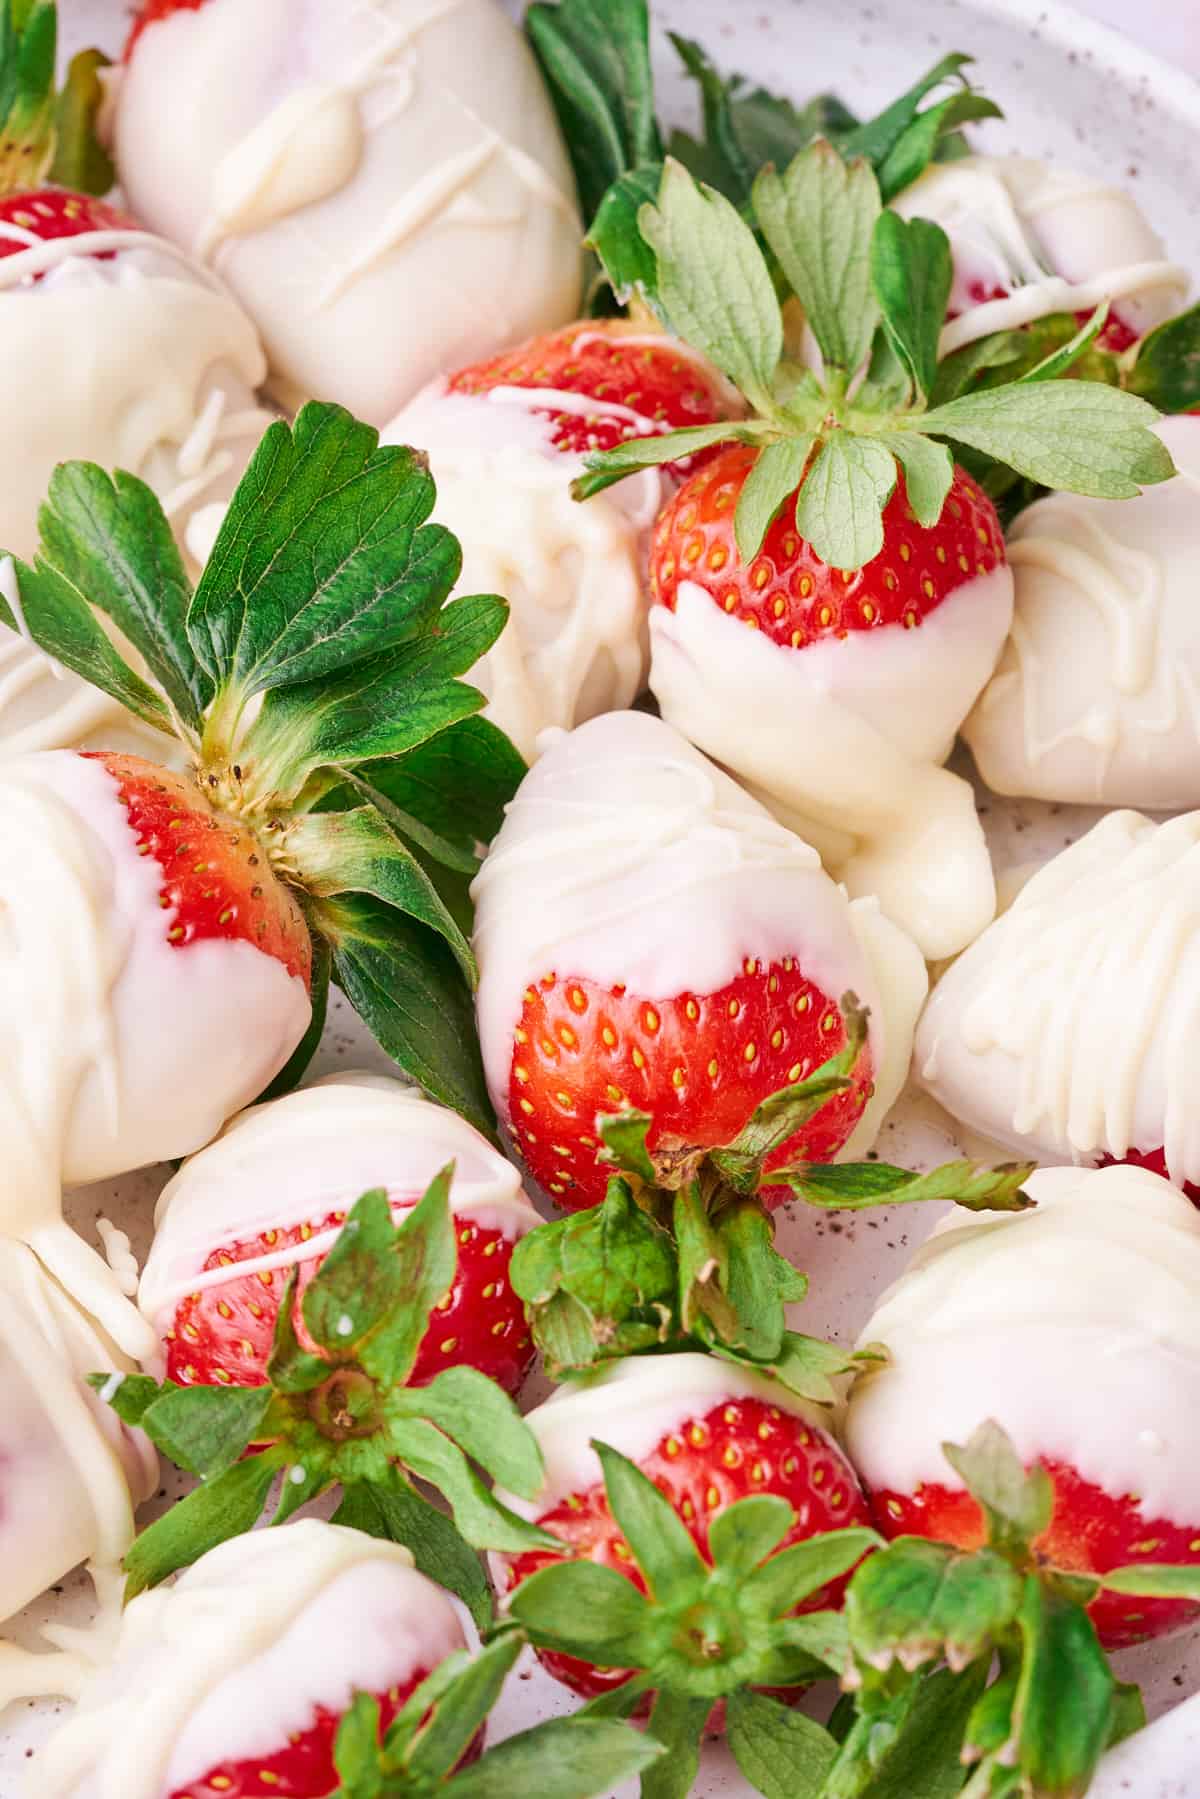 White chocolate covered strawberries on a plate.